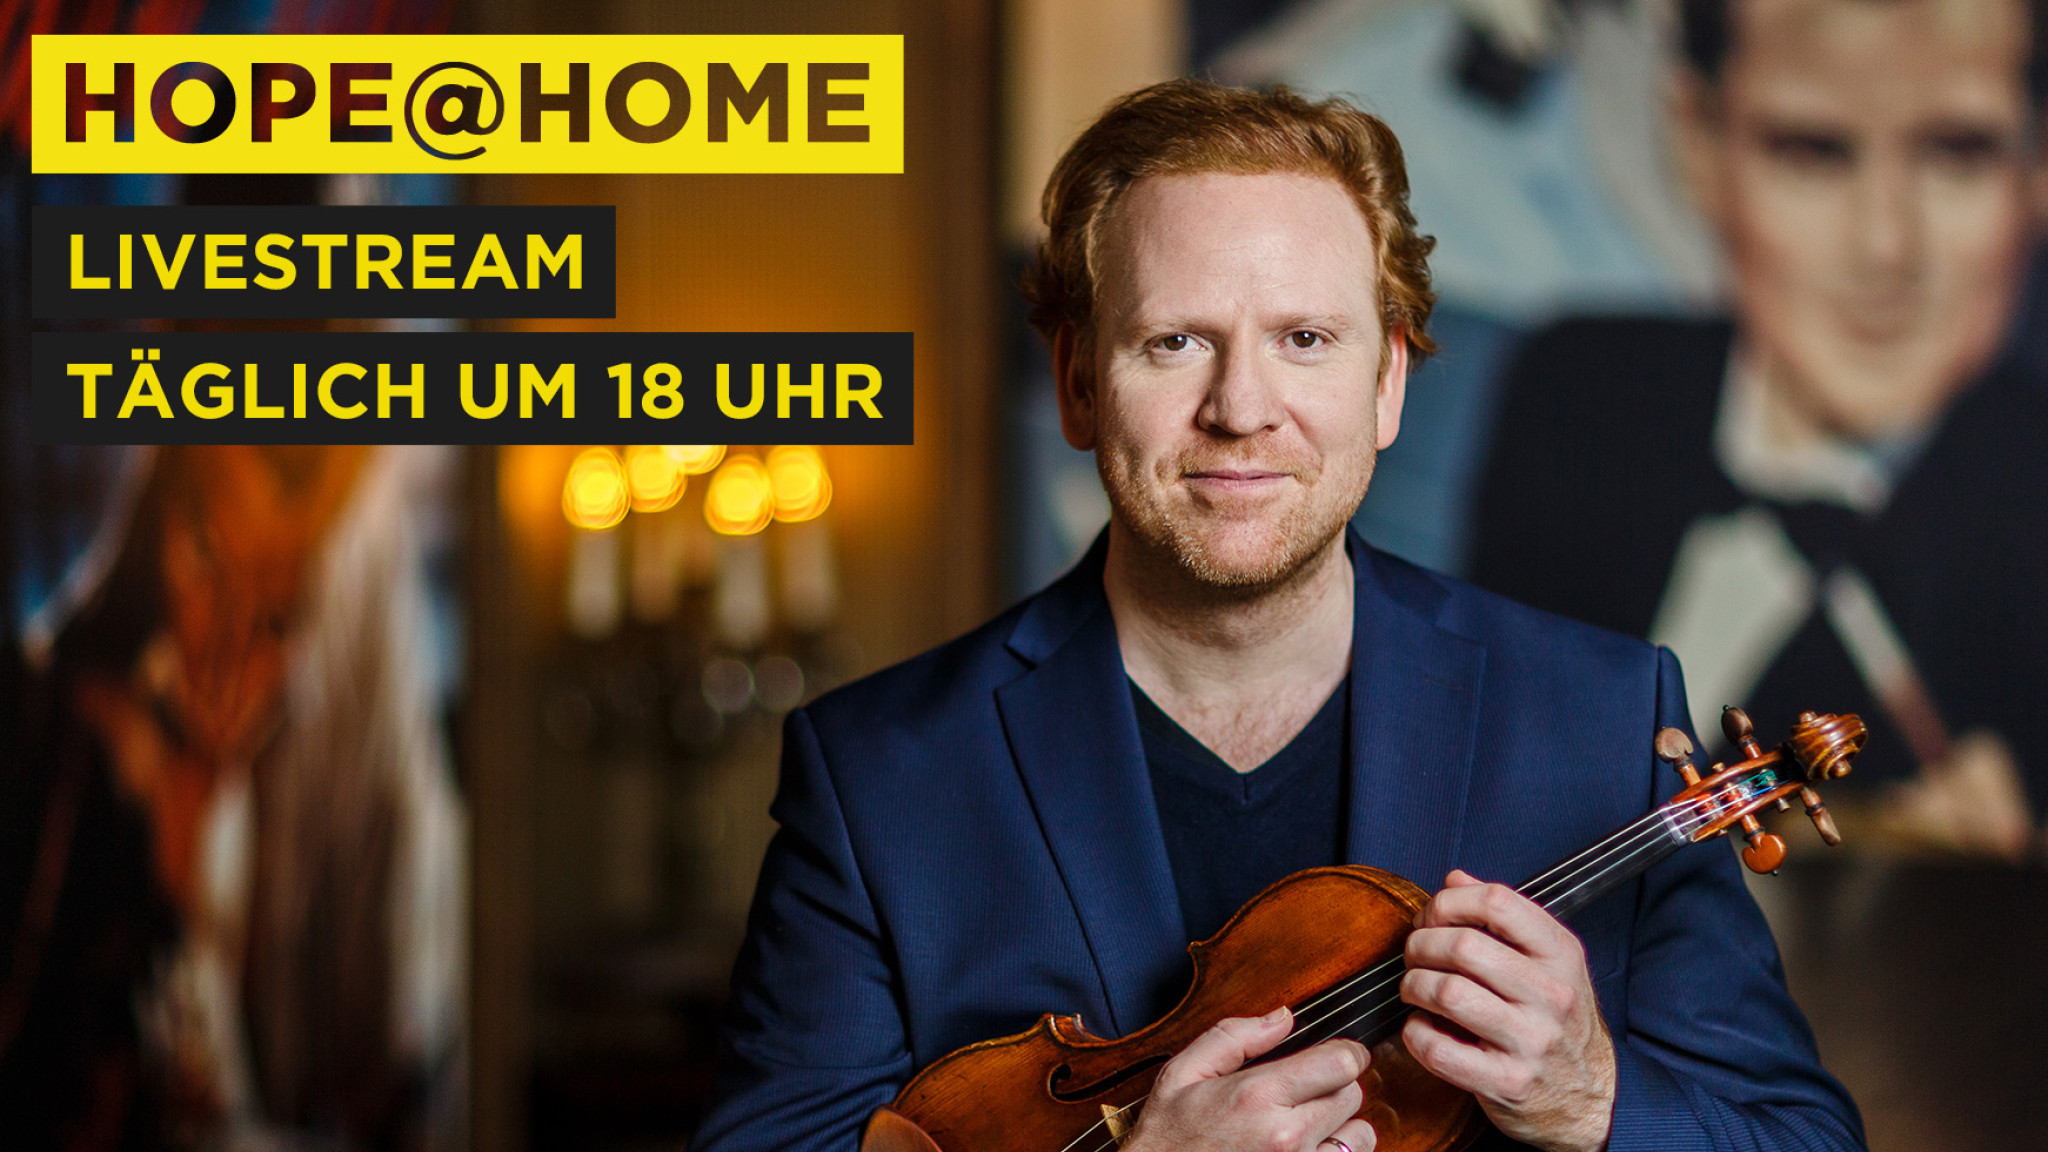 Hope@home - Daniel Hope launches daily livestream on DG YouTube and Arte Concert